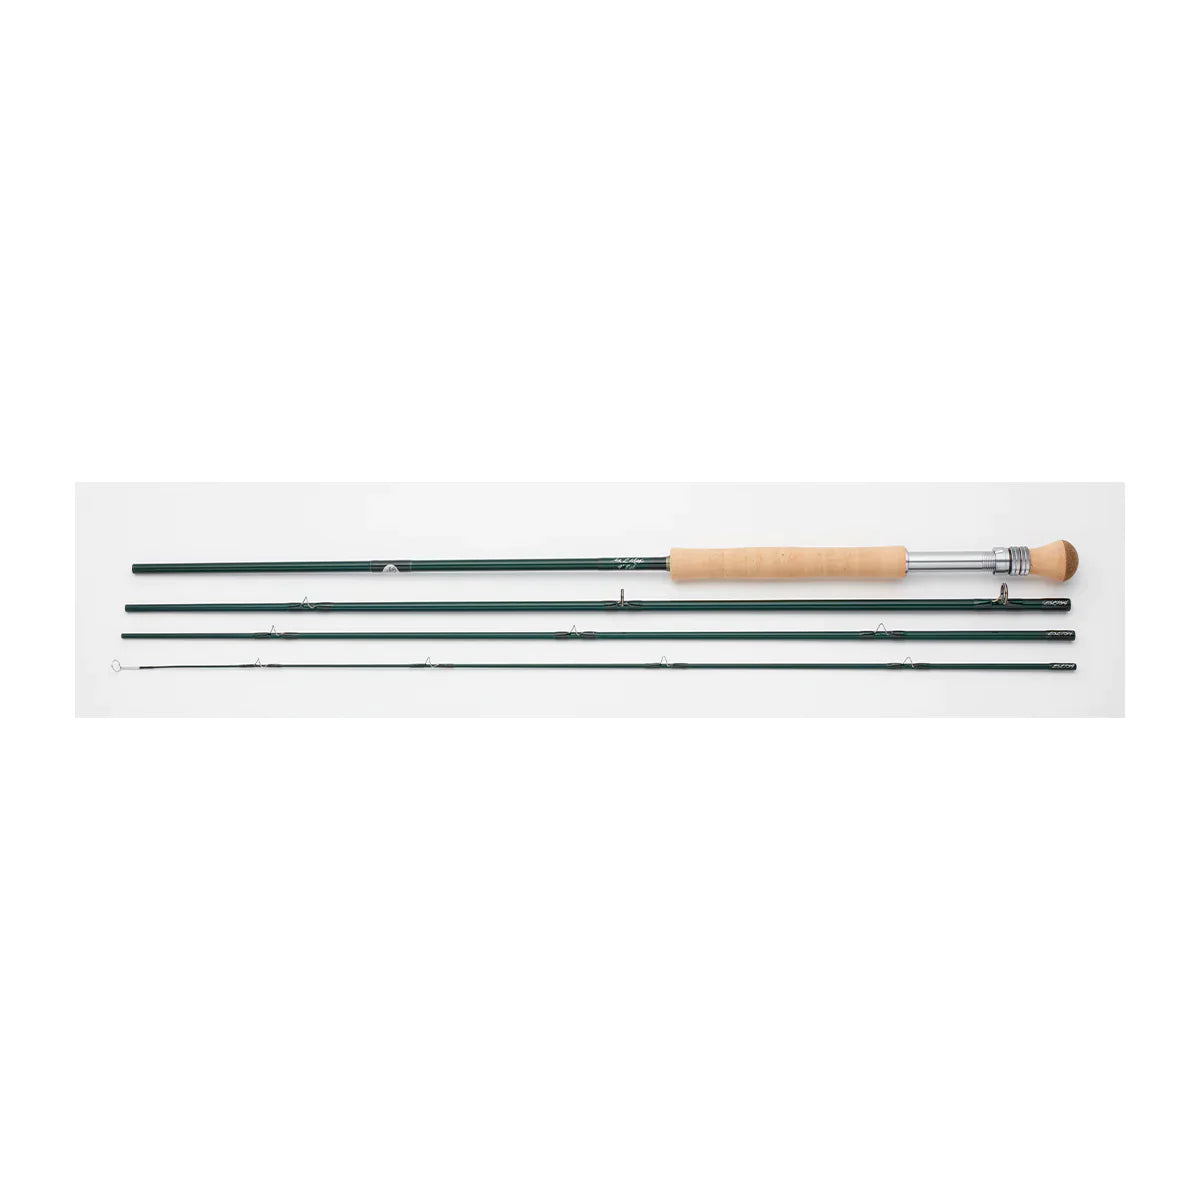 Winston AIR 2 MAX 8wt Fly Rod for Saltwater & Jungle Fly Fishing - NEW